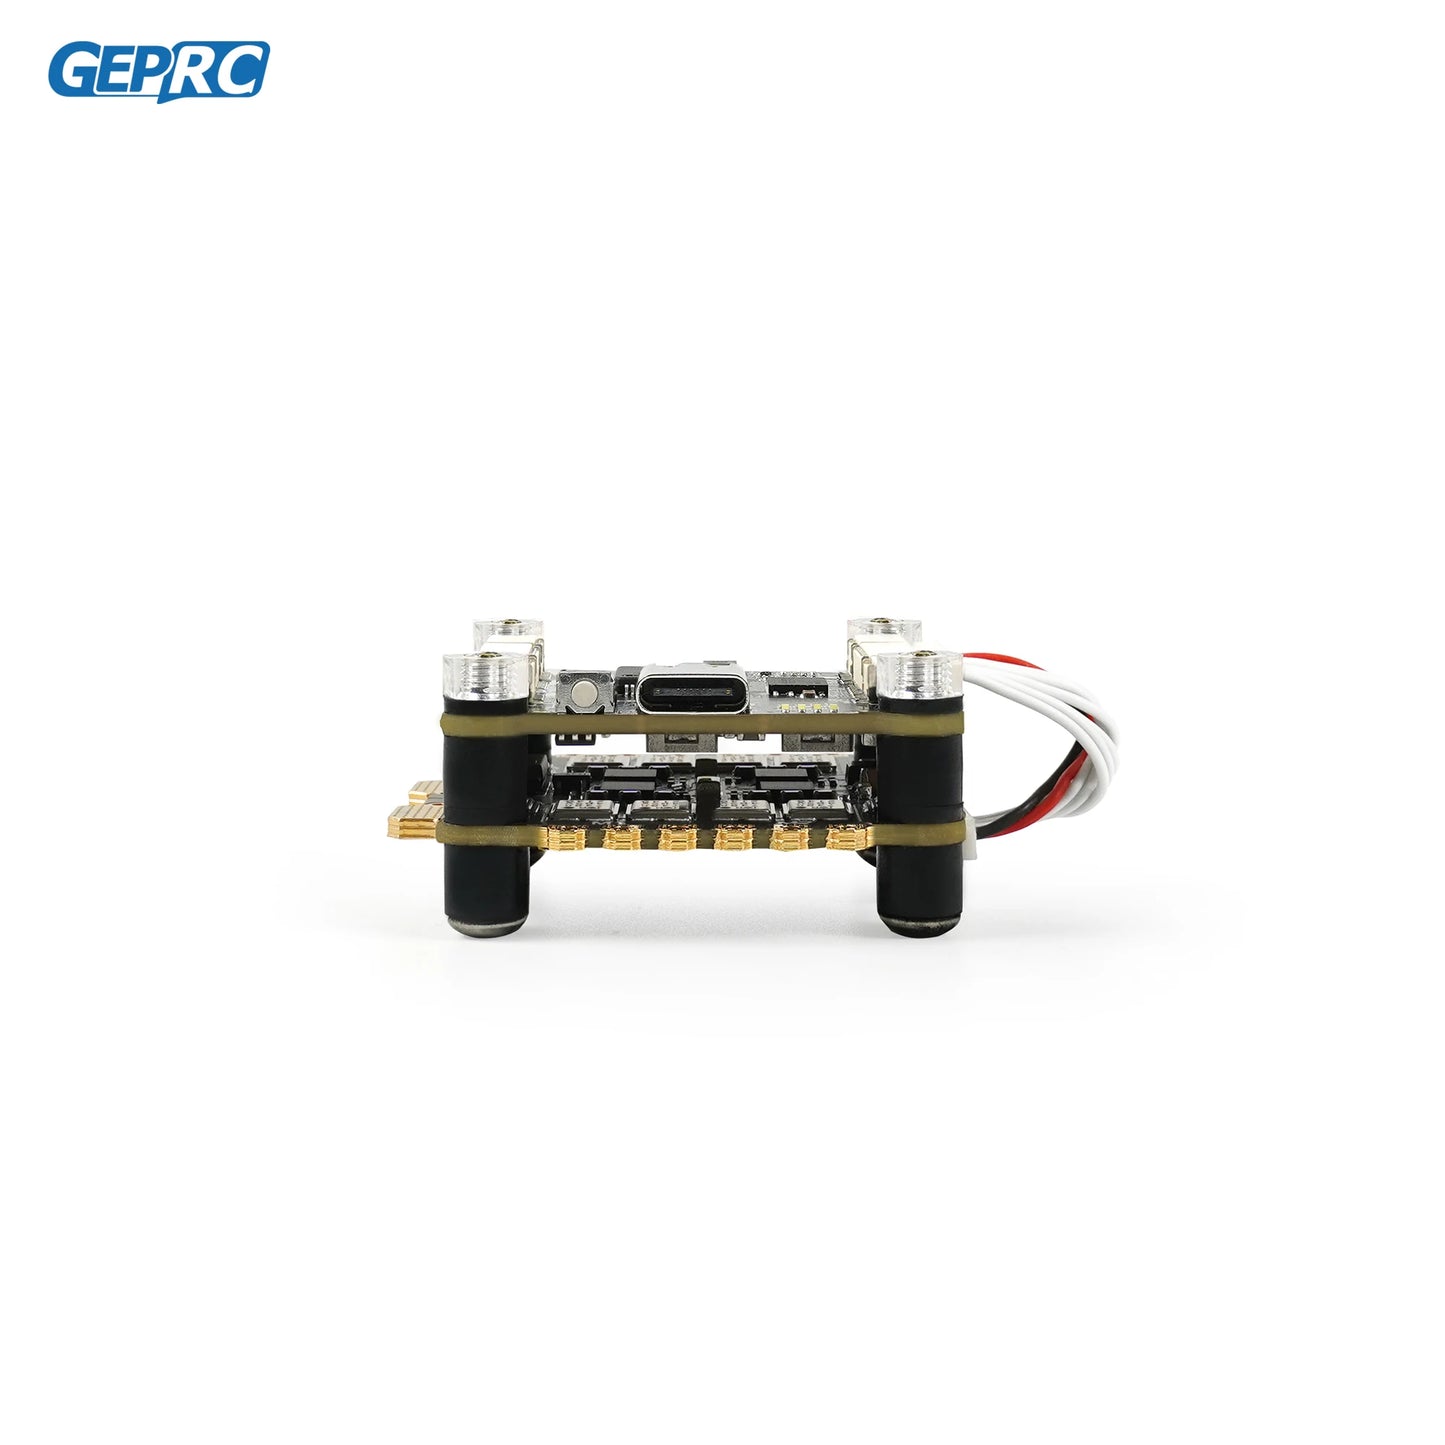 GEPRC TAKER F722 BL32 70A Stack Flight Controller Air Unit Connection 3-6S LiPo 9V2.5A/ 5V3A BEC for FPV